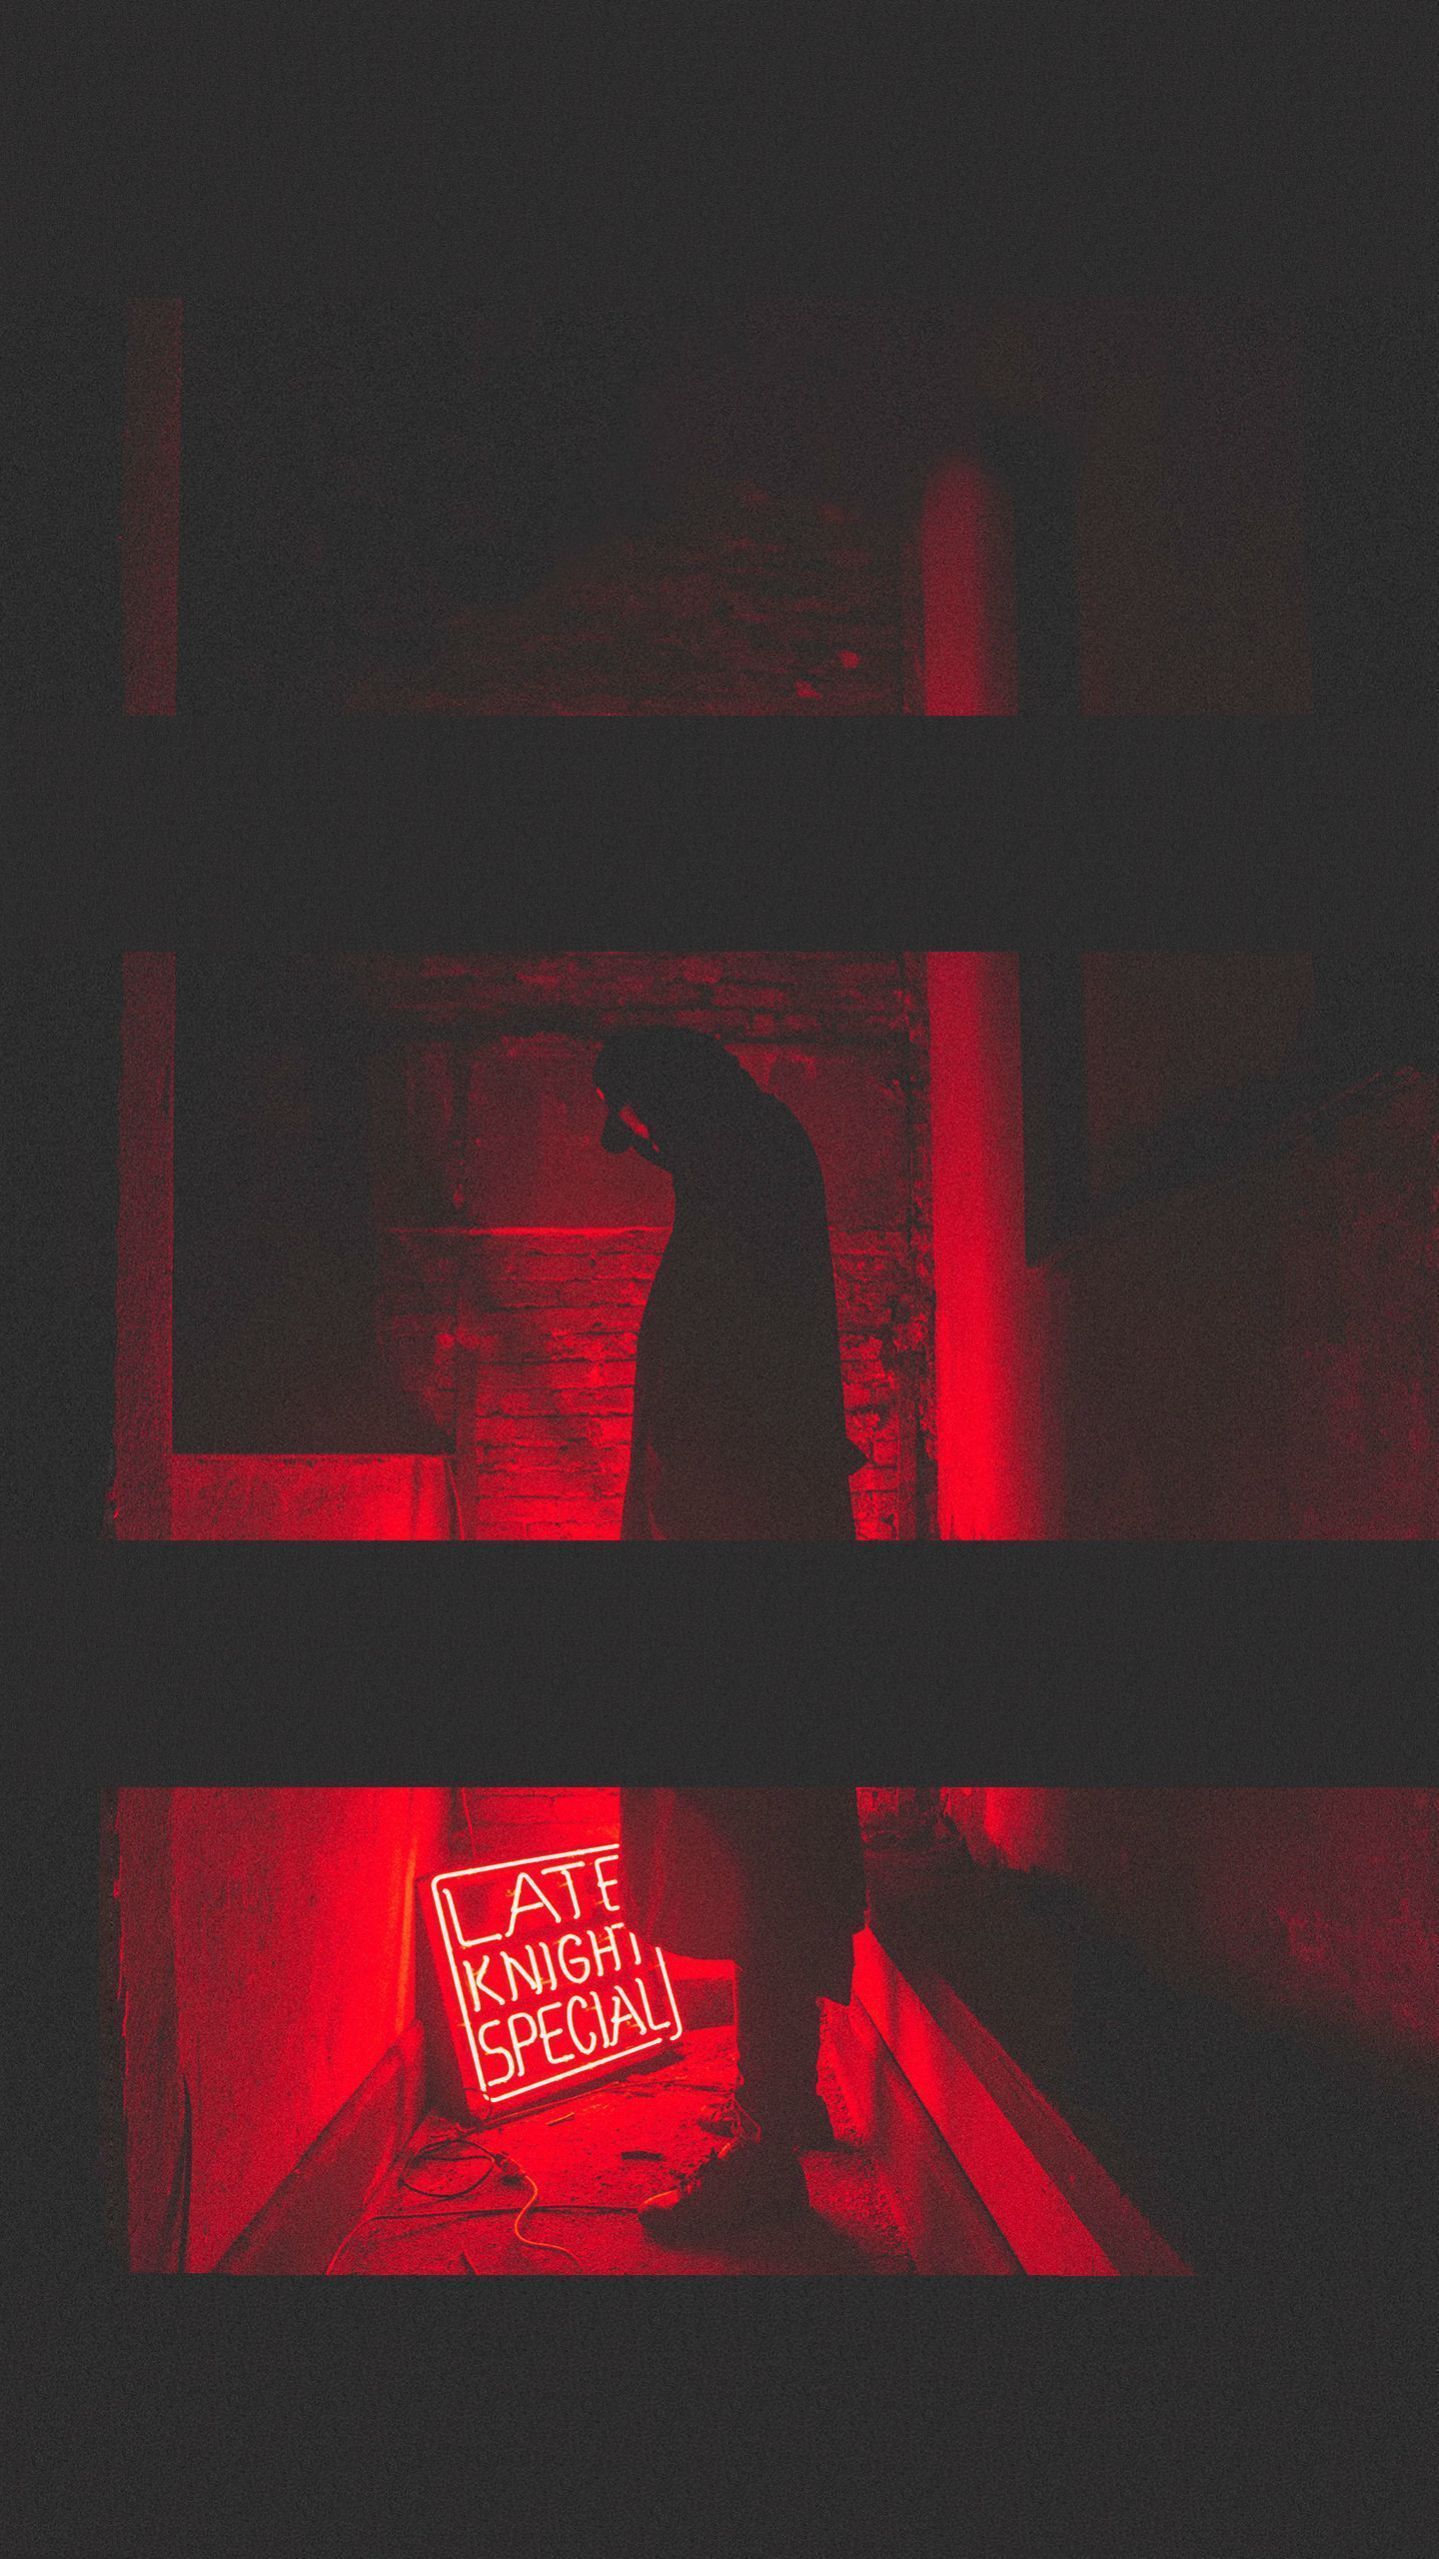 Aesthetic wallpaper of a man standing in a dark room with a red neon light in the background - Creepy